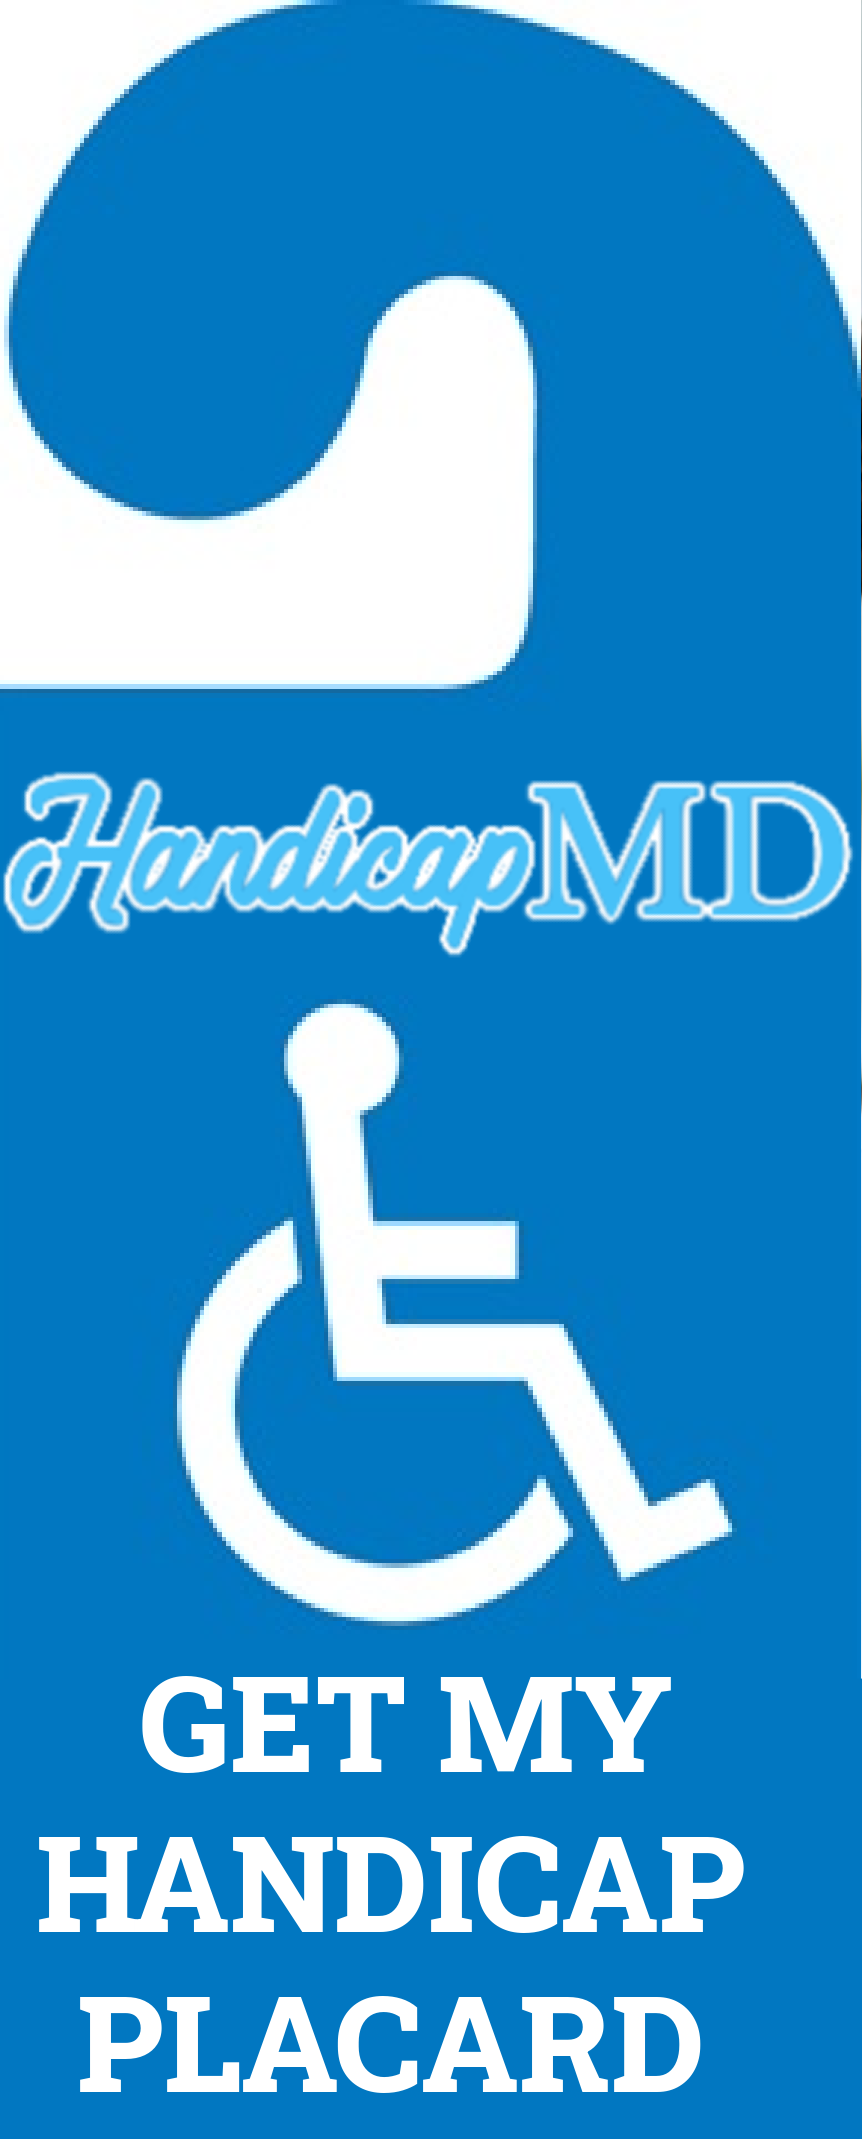 Tips for Displaying Your Handicap Placard Correctly in North Carolina